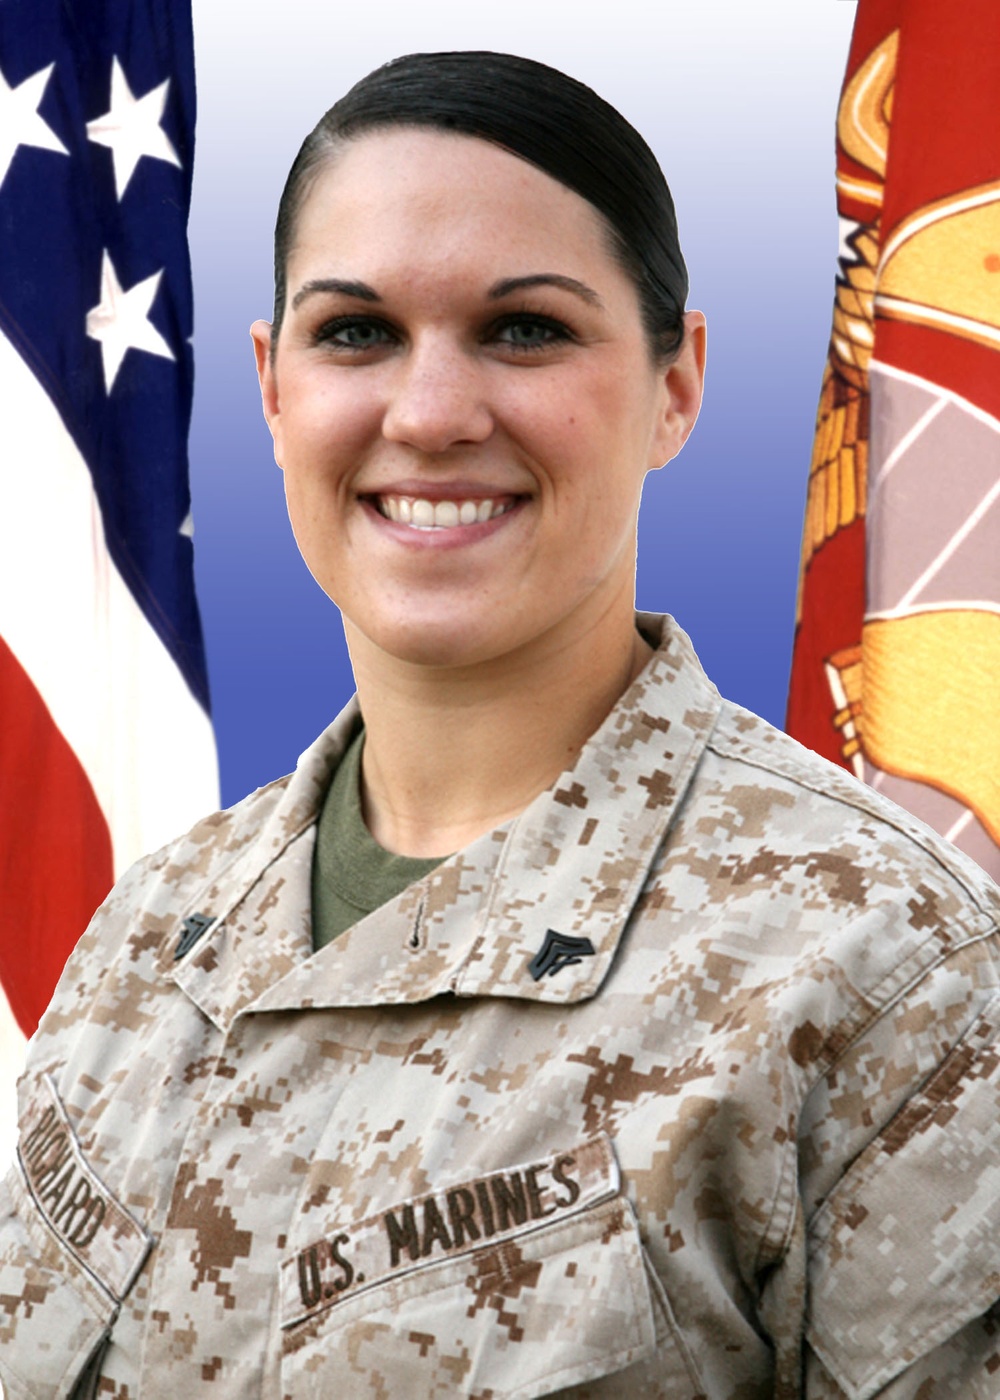 US Marine, Townsend, Del., native’s leadership and performance is recognized